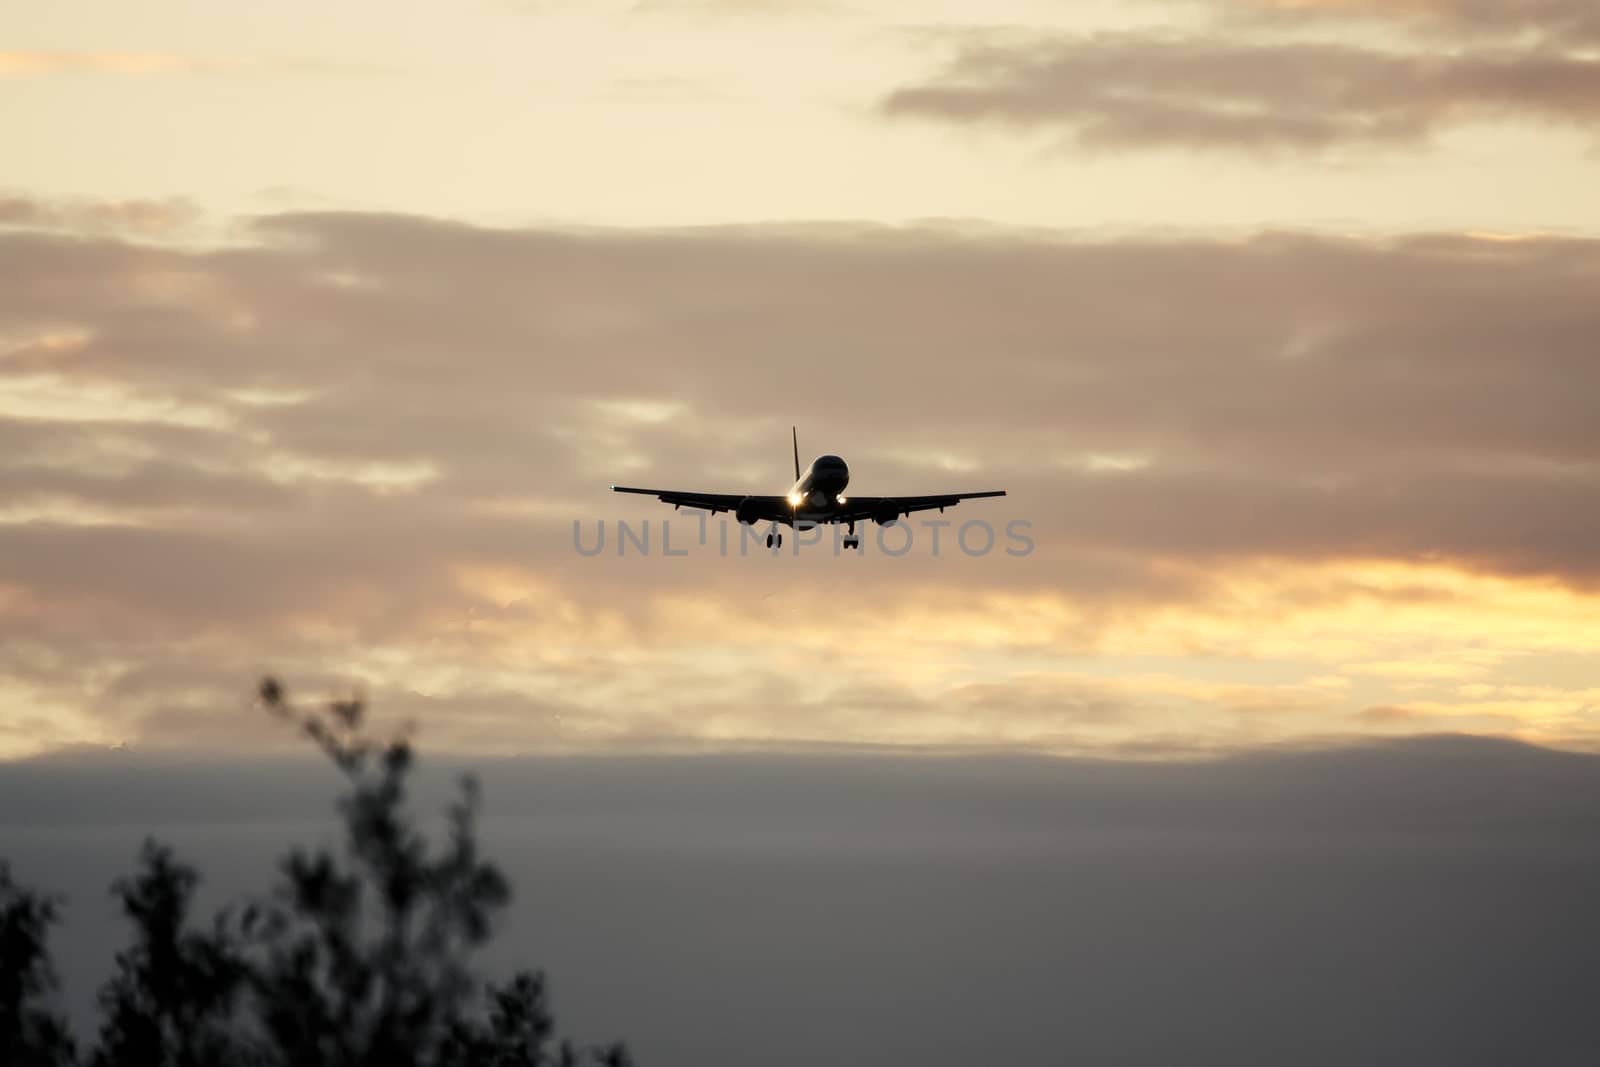 A photography of a jet air plane in sunset sky